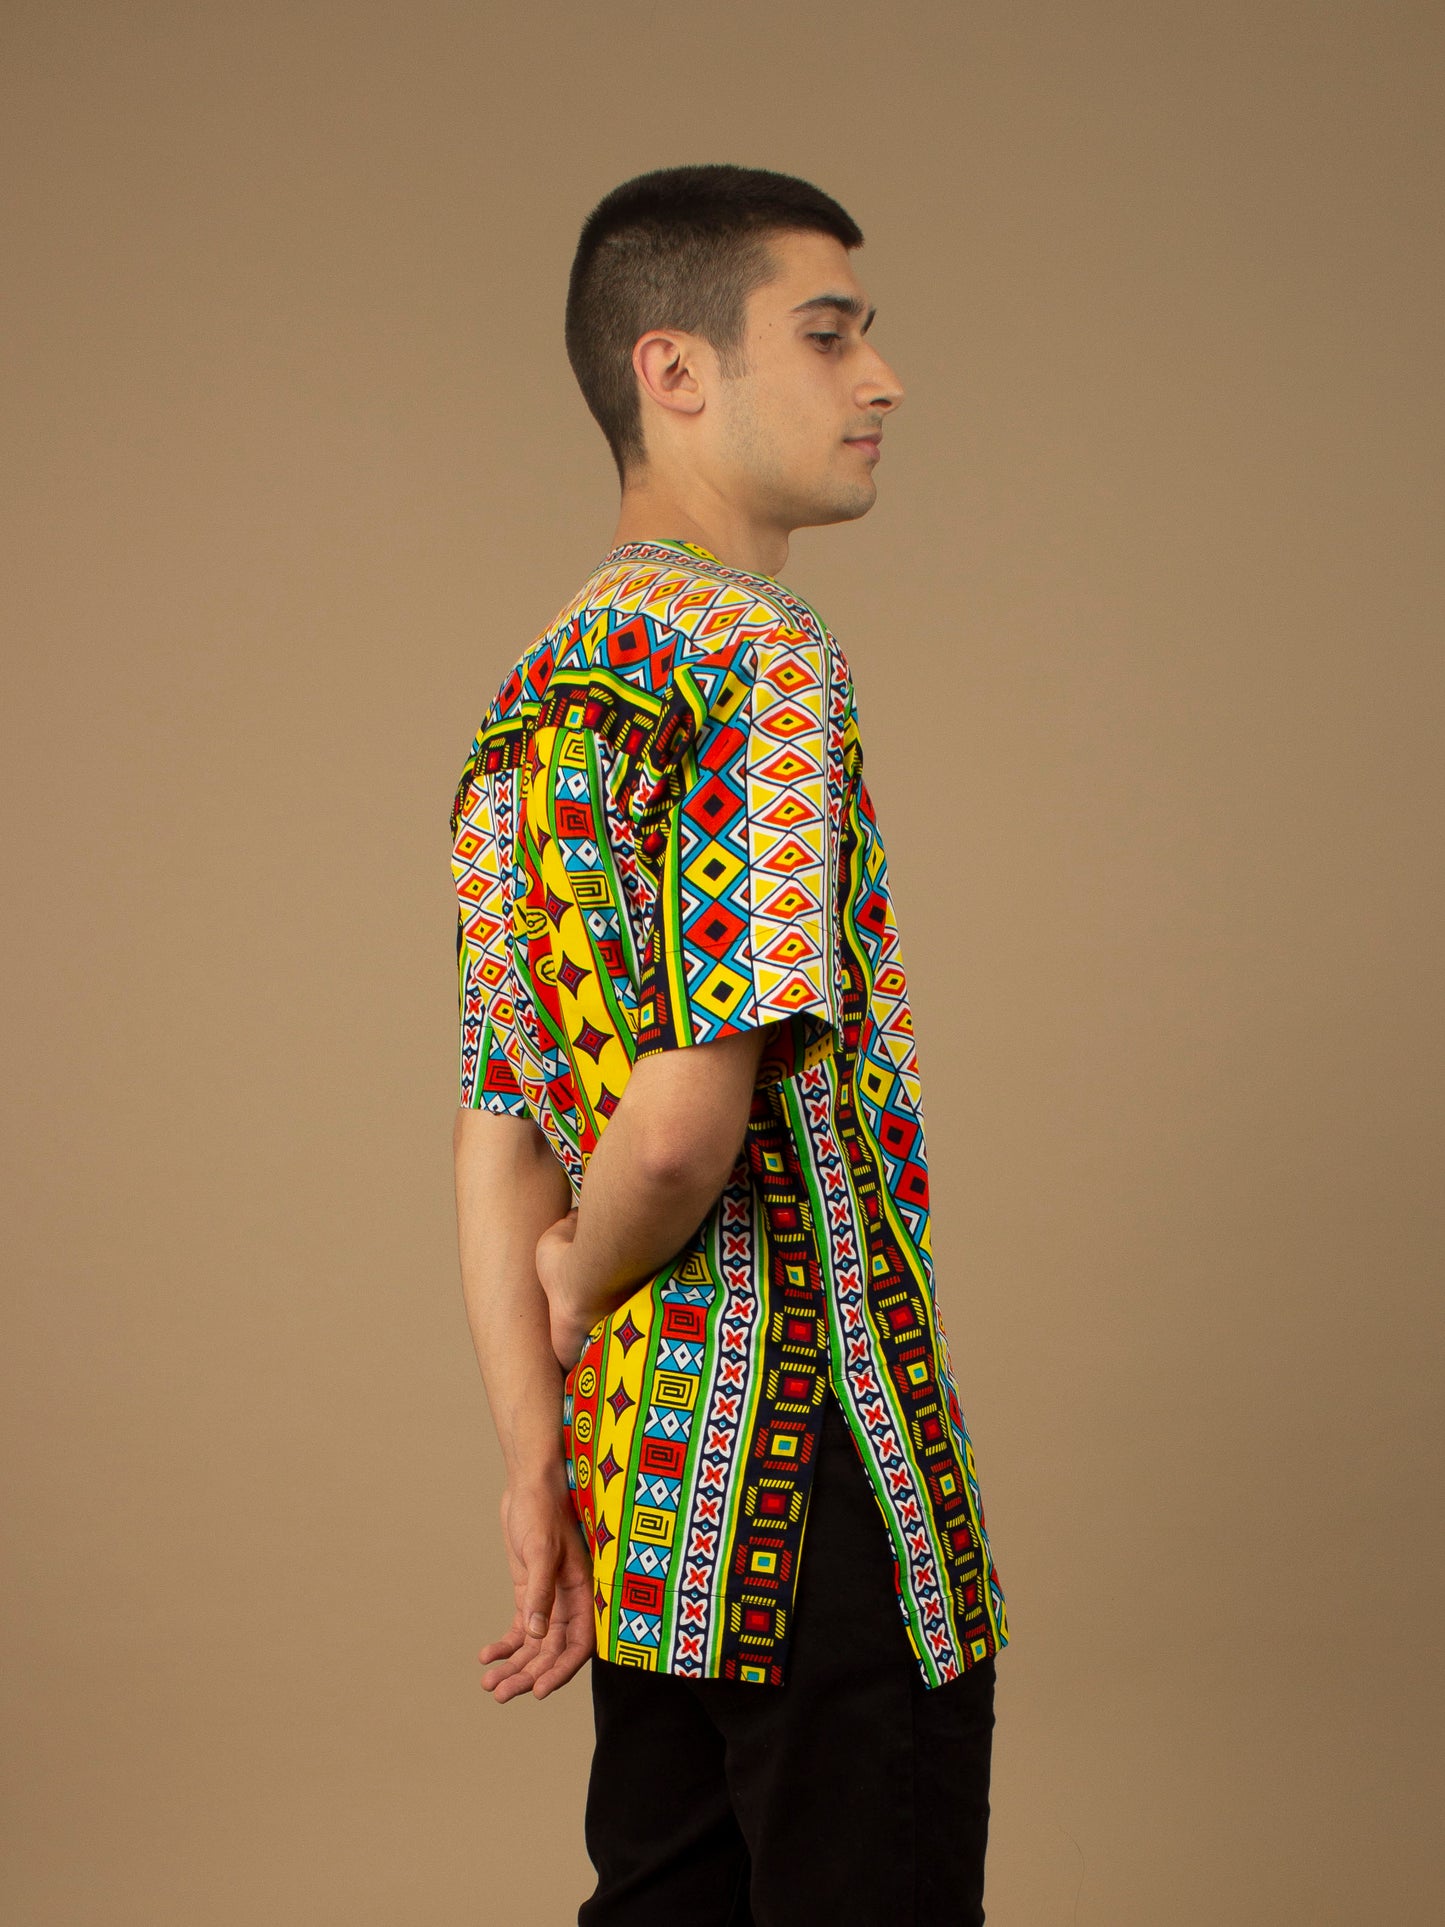 The Akala African Print Kaftan Top is ethically printed in a repeated multicolored geometric Kente African pattern with a Matte Black trim, wax printed body shirt made from sustainable Ankara wax printed cotton.. Designed in England Made in Nigeria. Available in standard and plus sizes (UK XS-5XL).